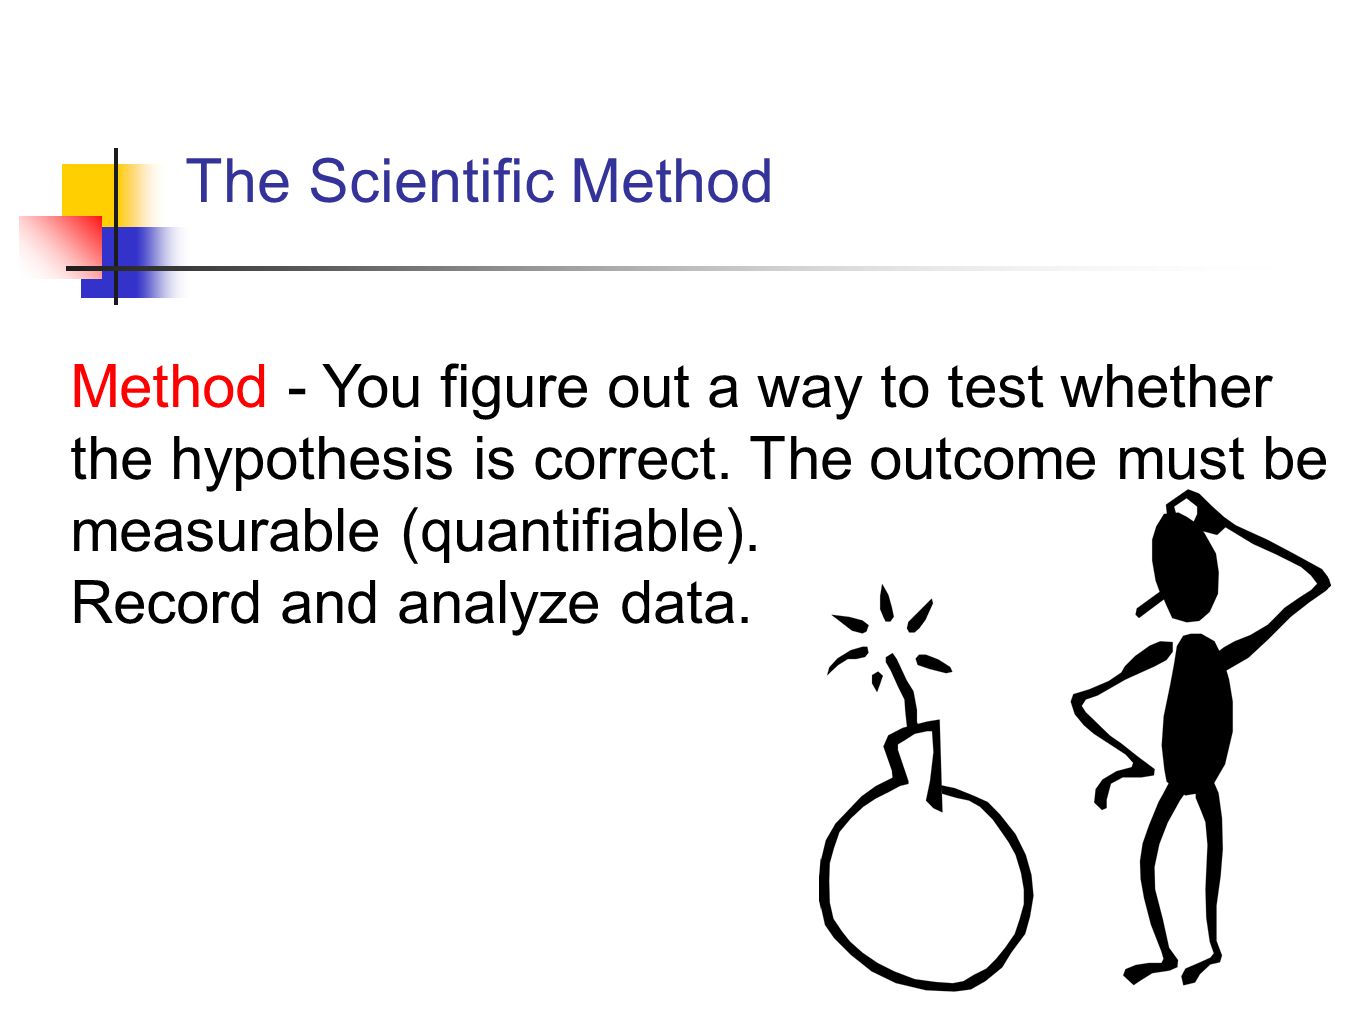 The Scientific Method Method - You figure out a way to test whether the hypothesis is correct.